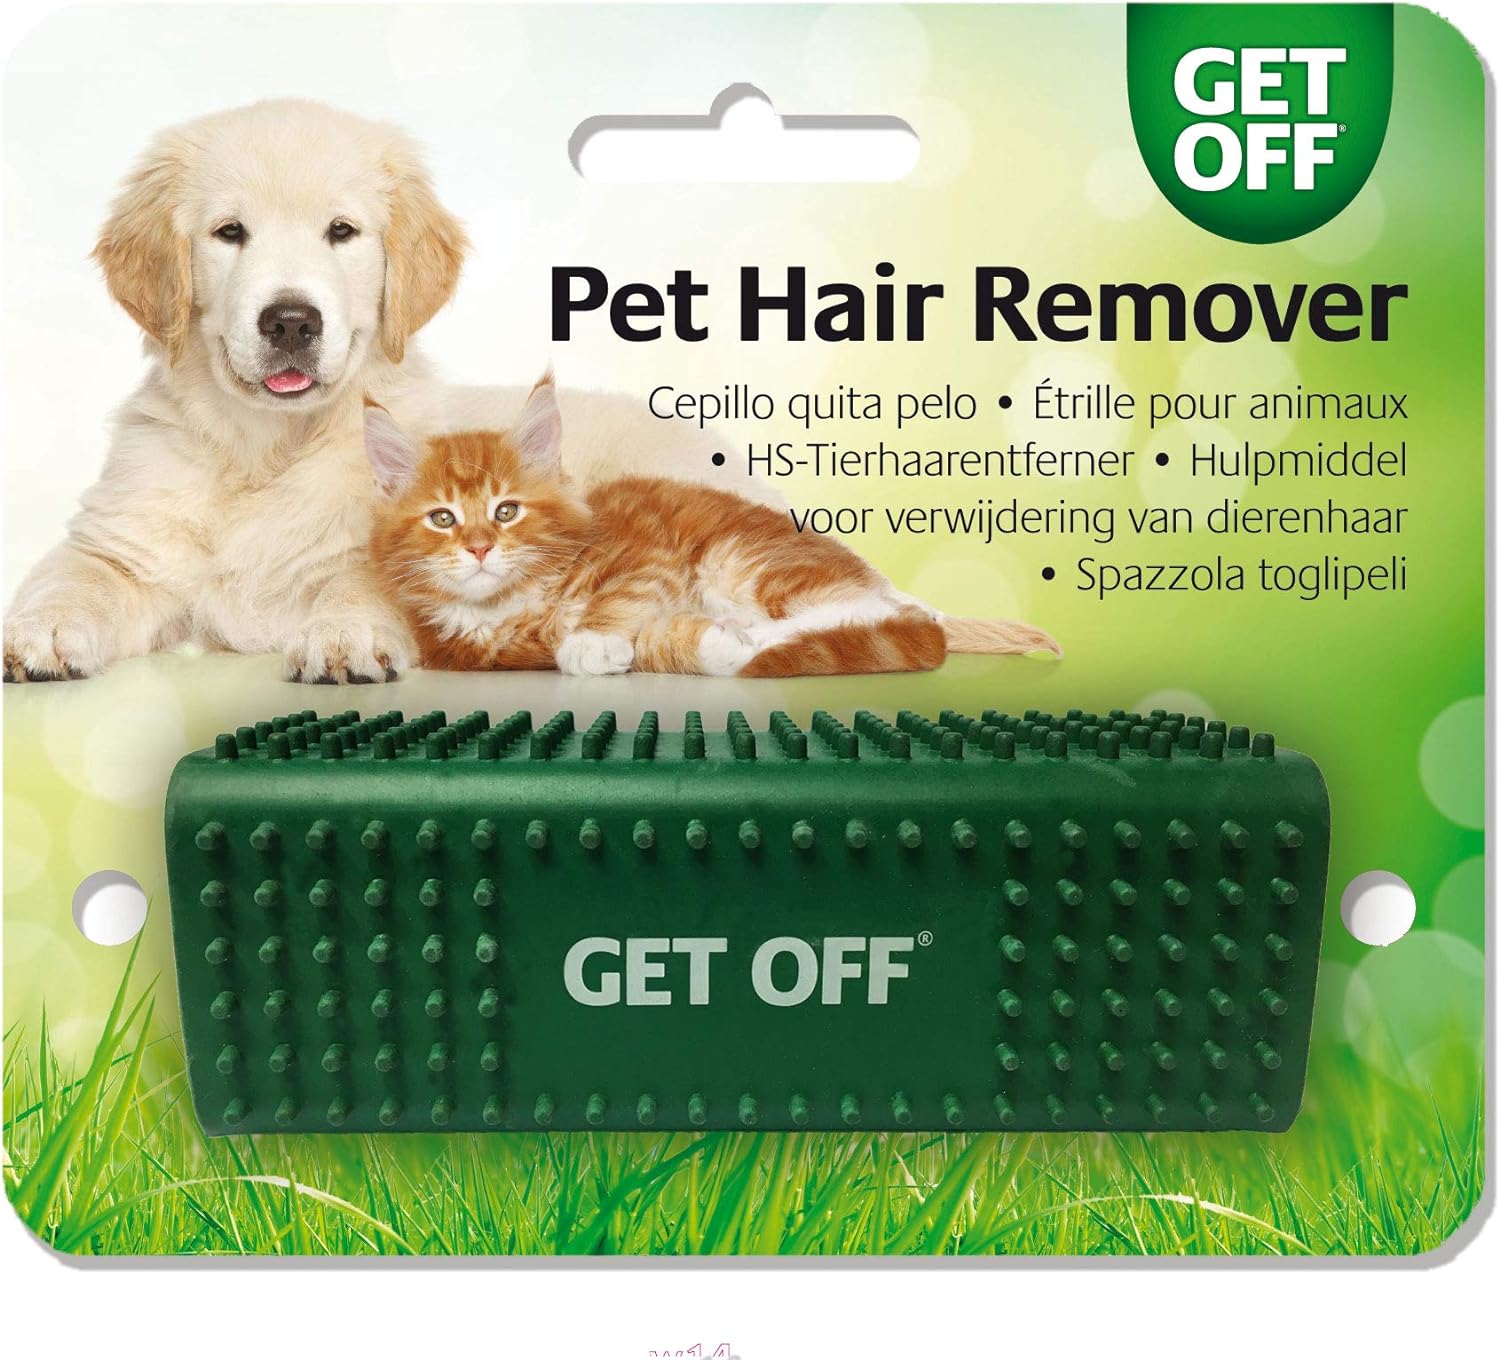 GET OFF Pet Hair Remover, Green